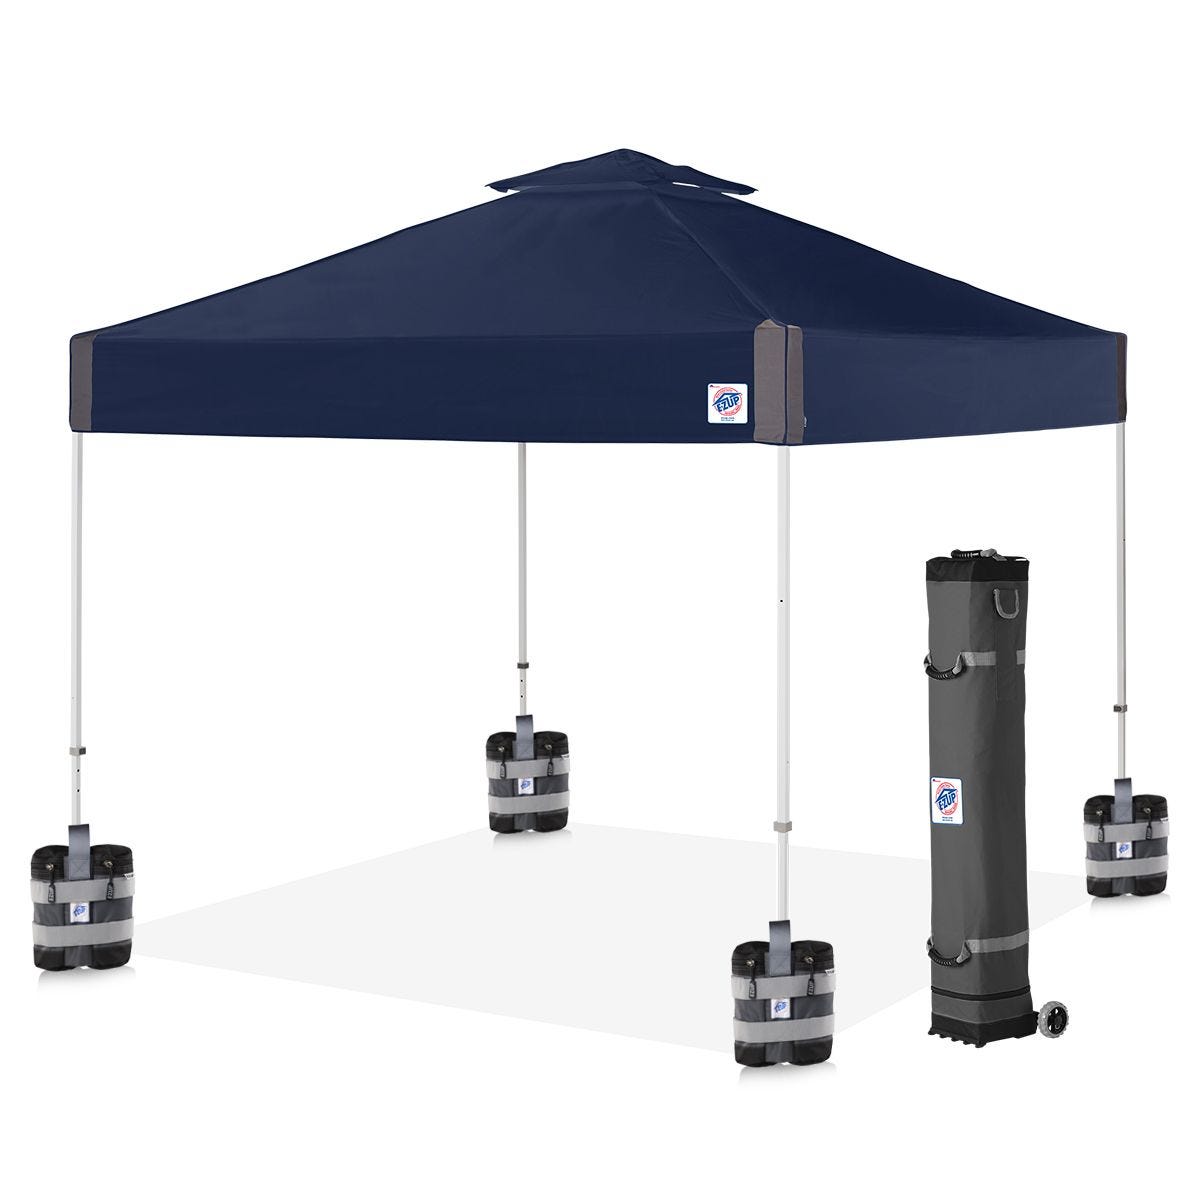 Pyramid™ Vented Shelter & Weight Bag Bundle